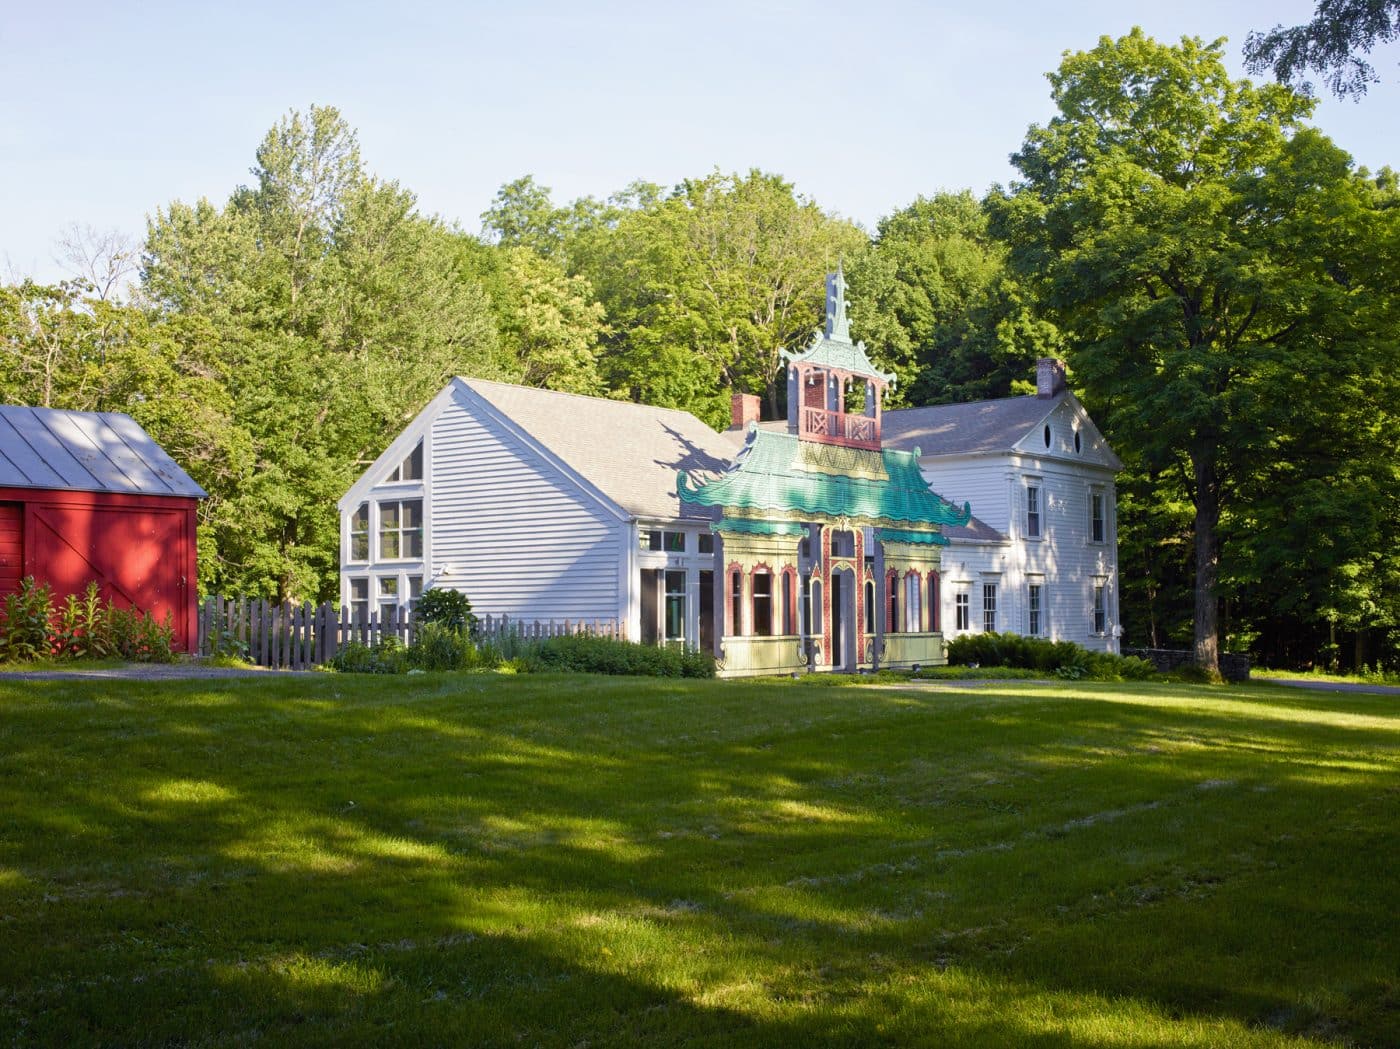 Exterior of the home, where Venturi and Scott Brown designed a chinoiserie facade. 